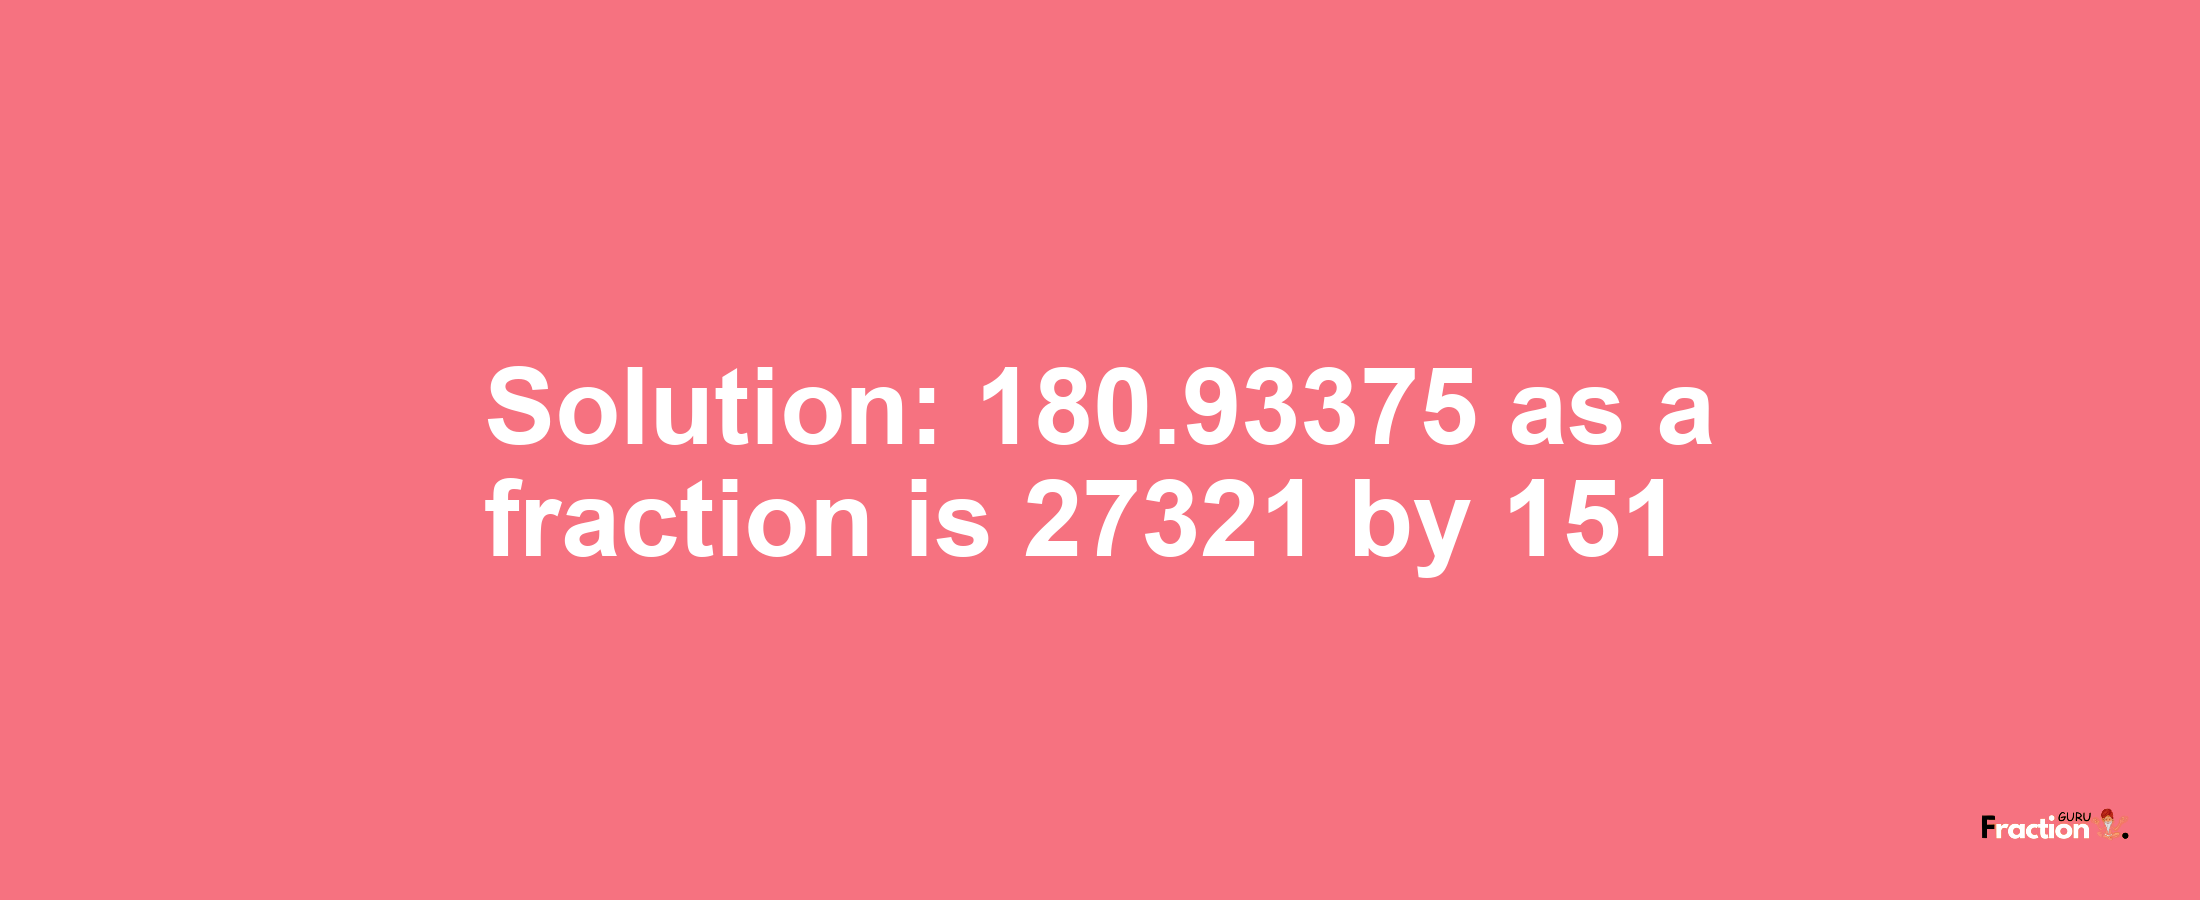 Solution:180.93375 as a fraction is 27321/151